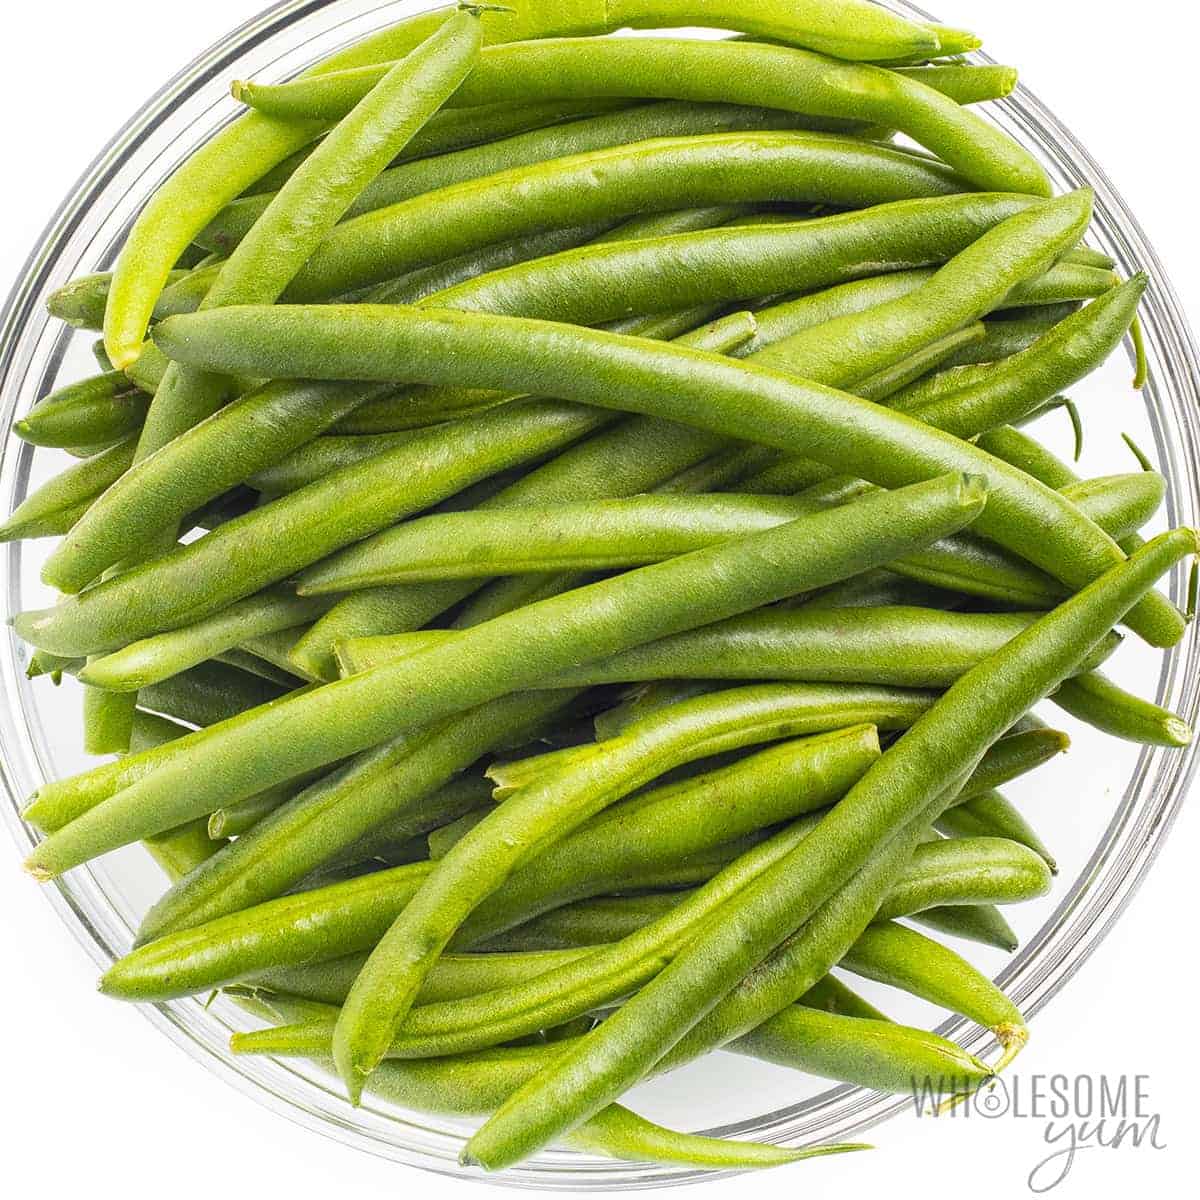 How high are carbs in green beans? These fresh green beans are naturally low in carbs.